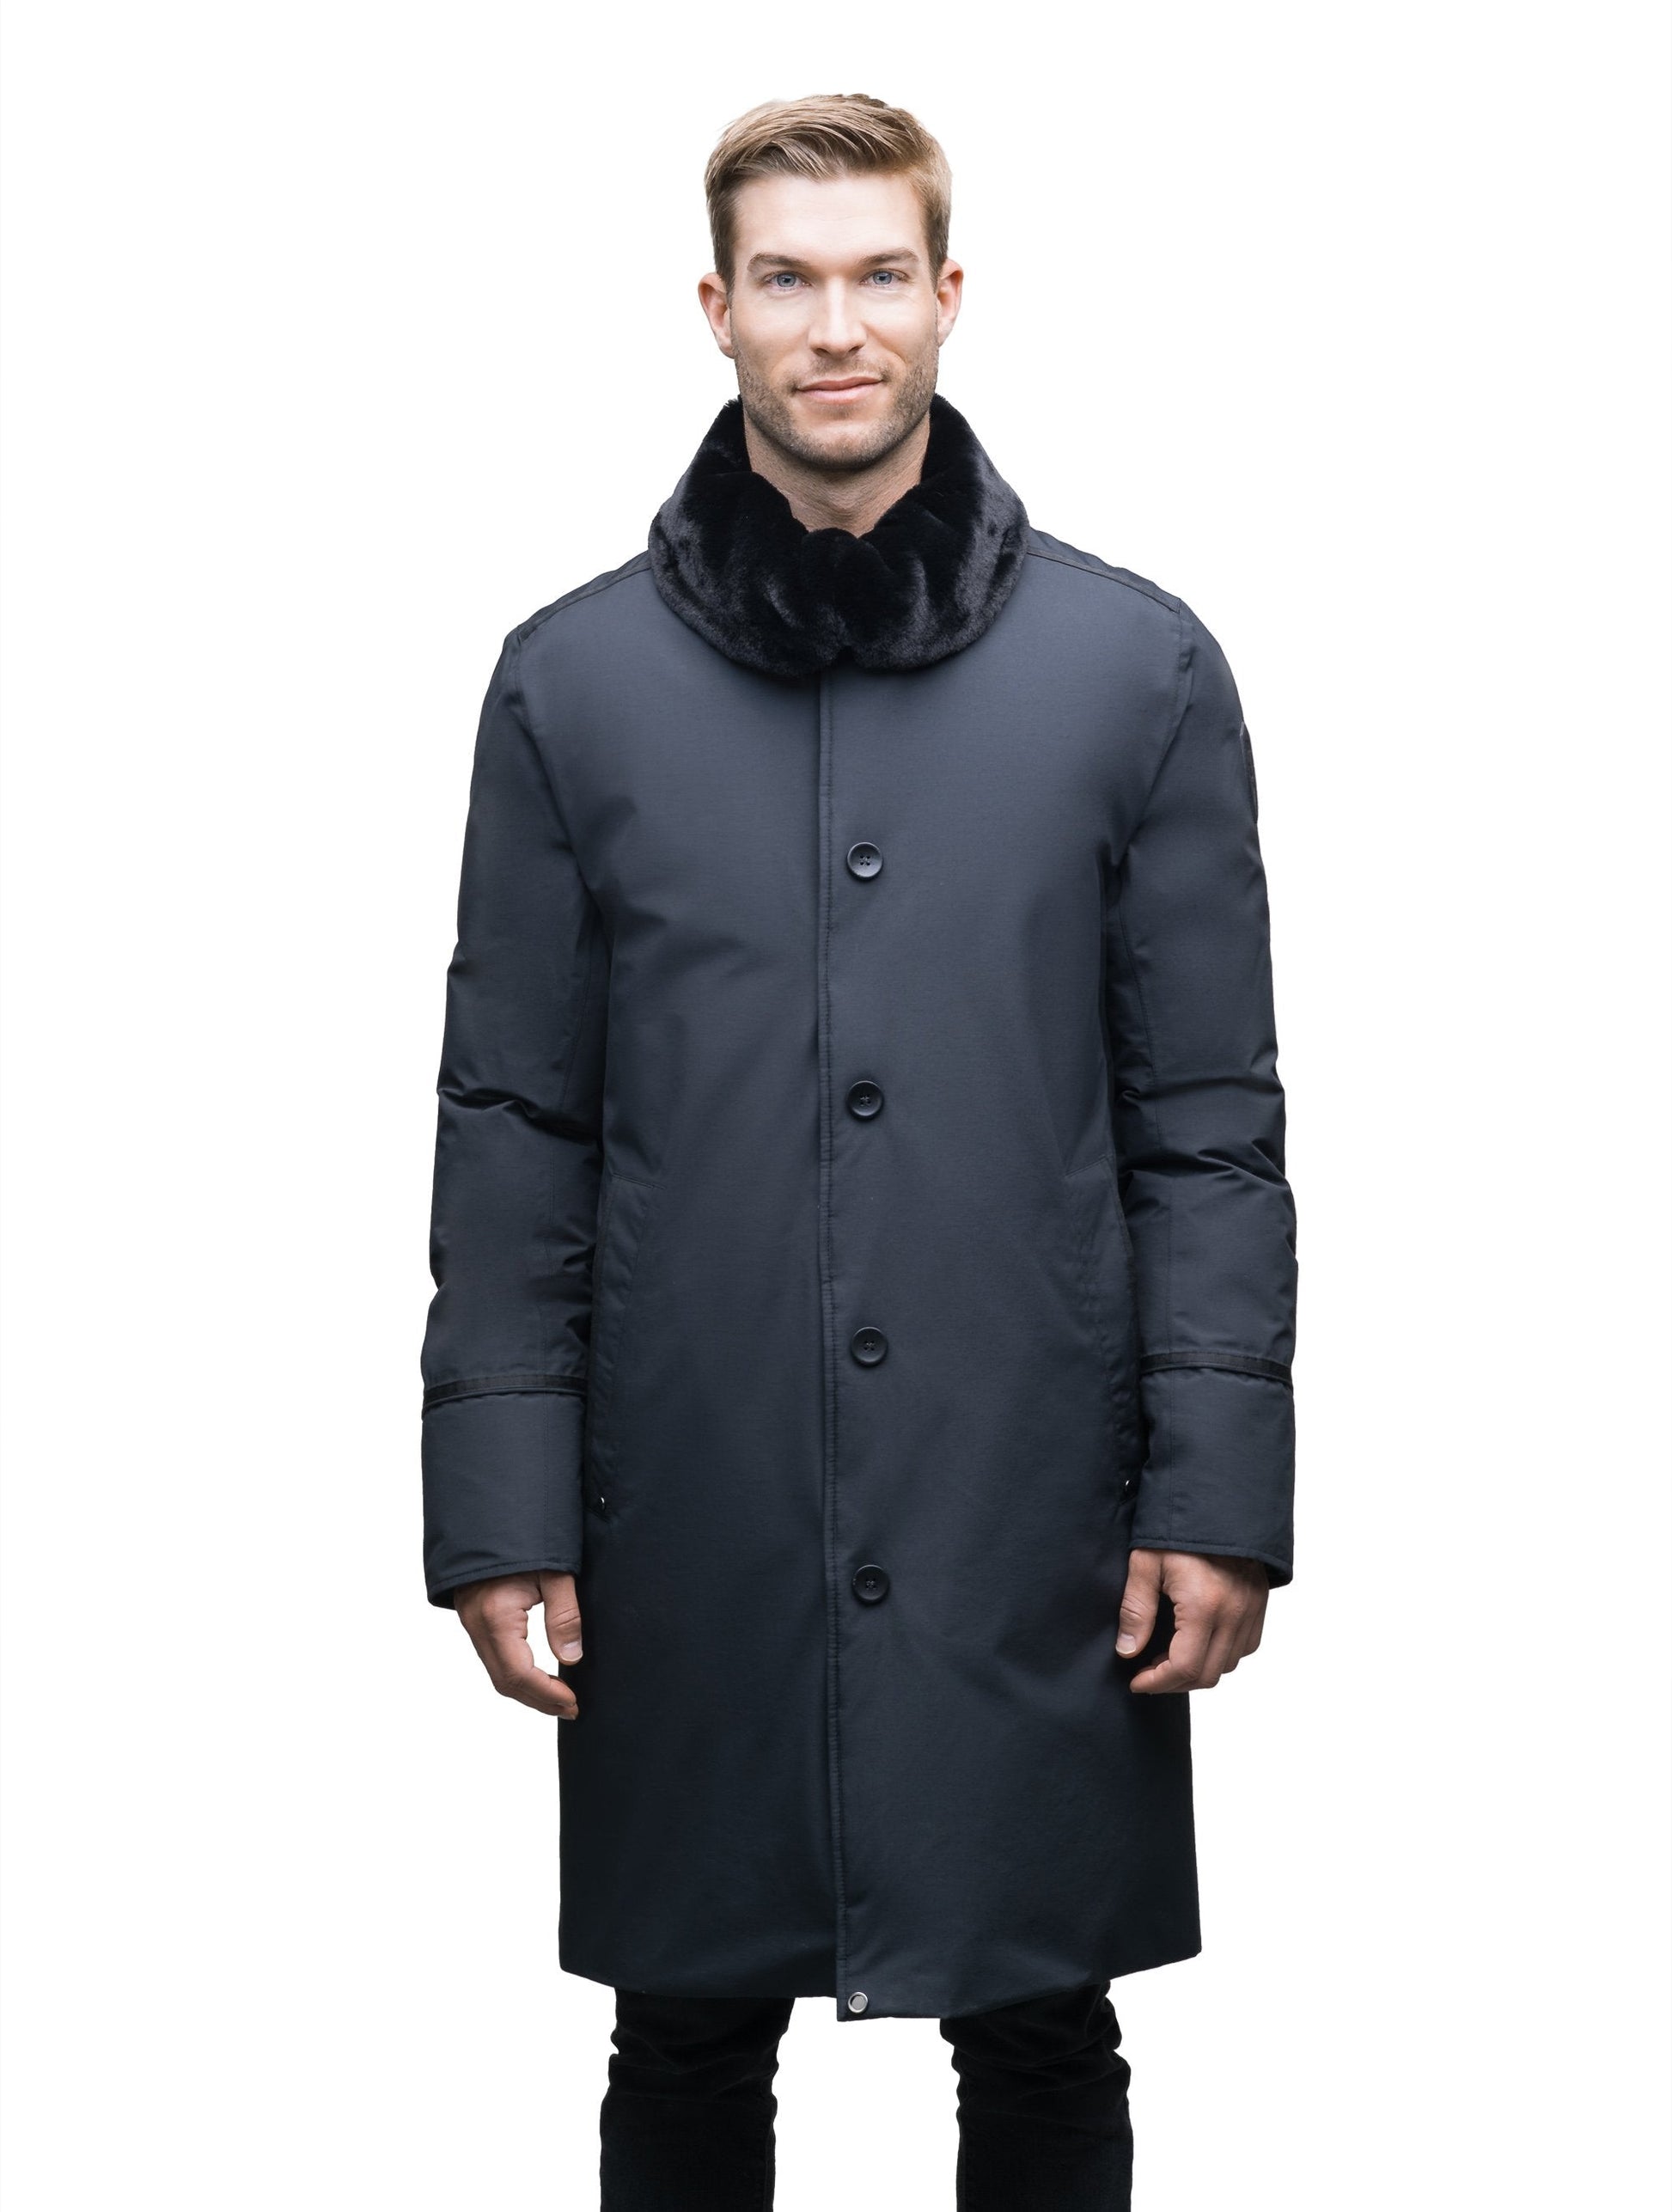 Men's long down filled overcoat with faux fur trim in Cy Black